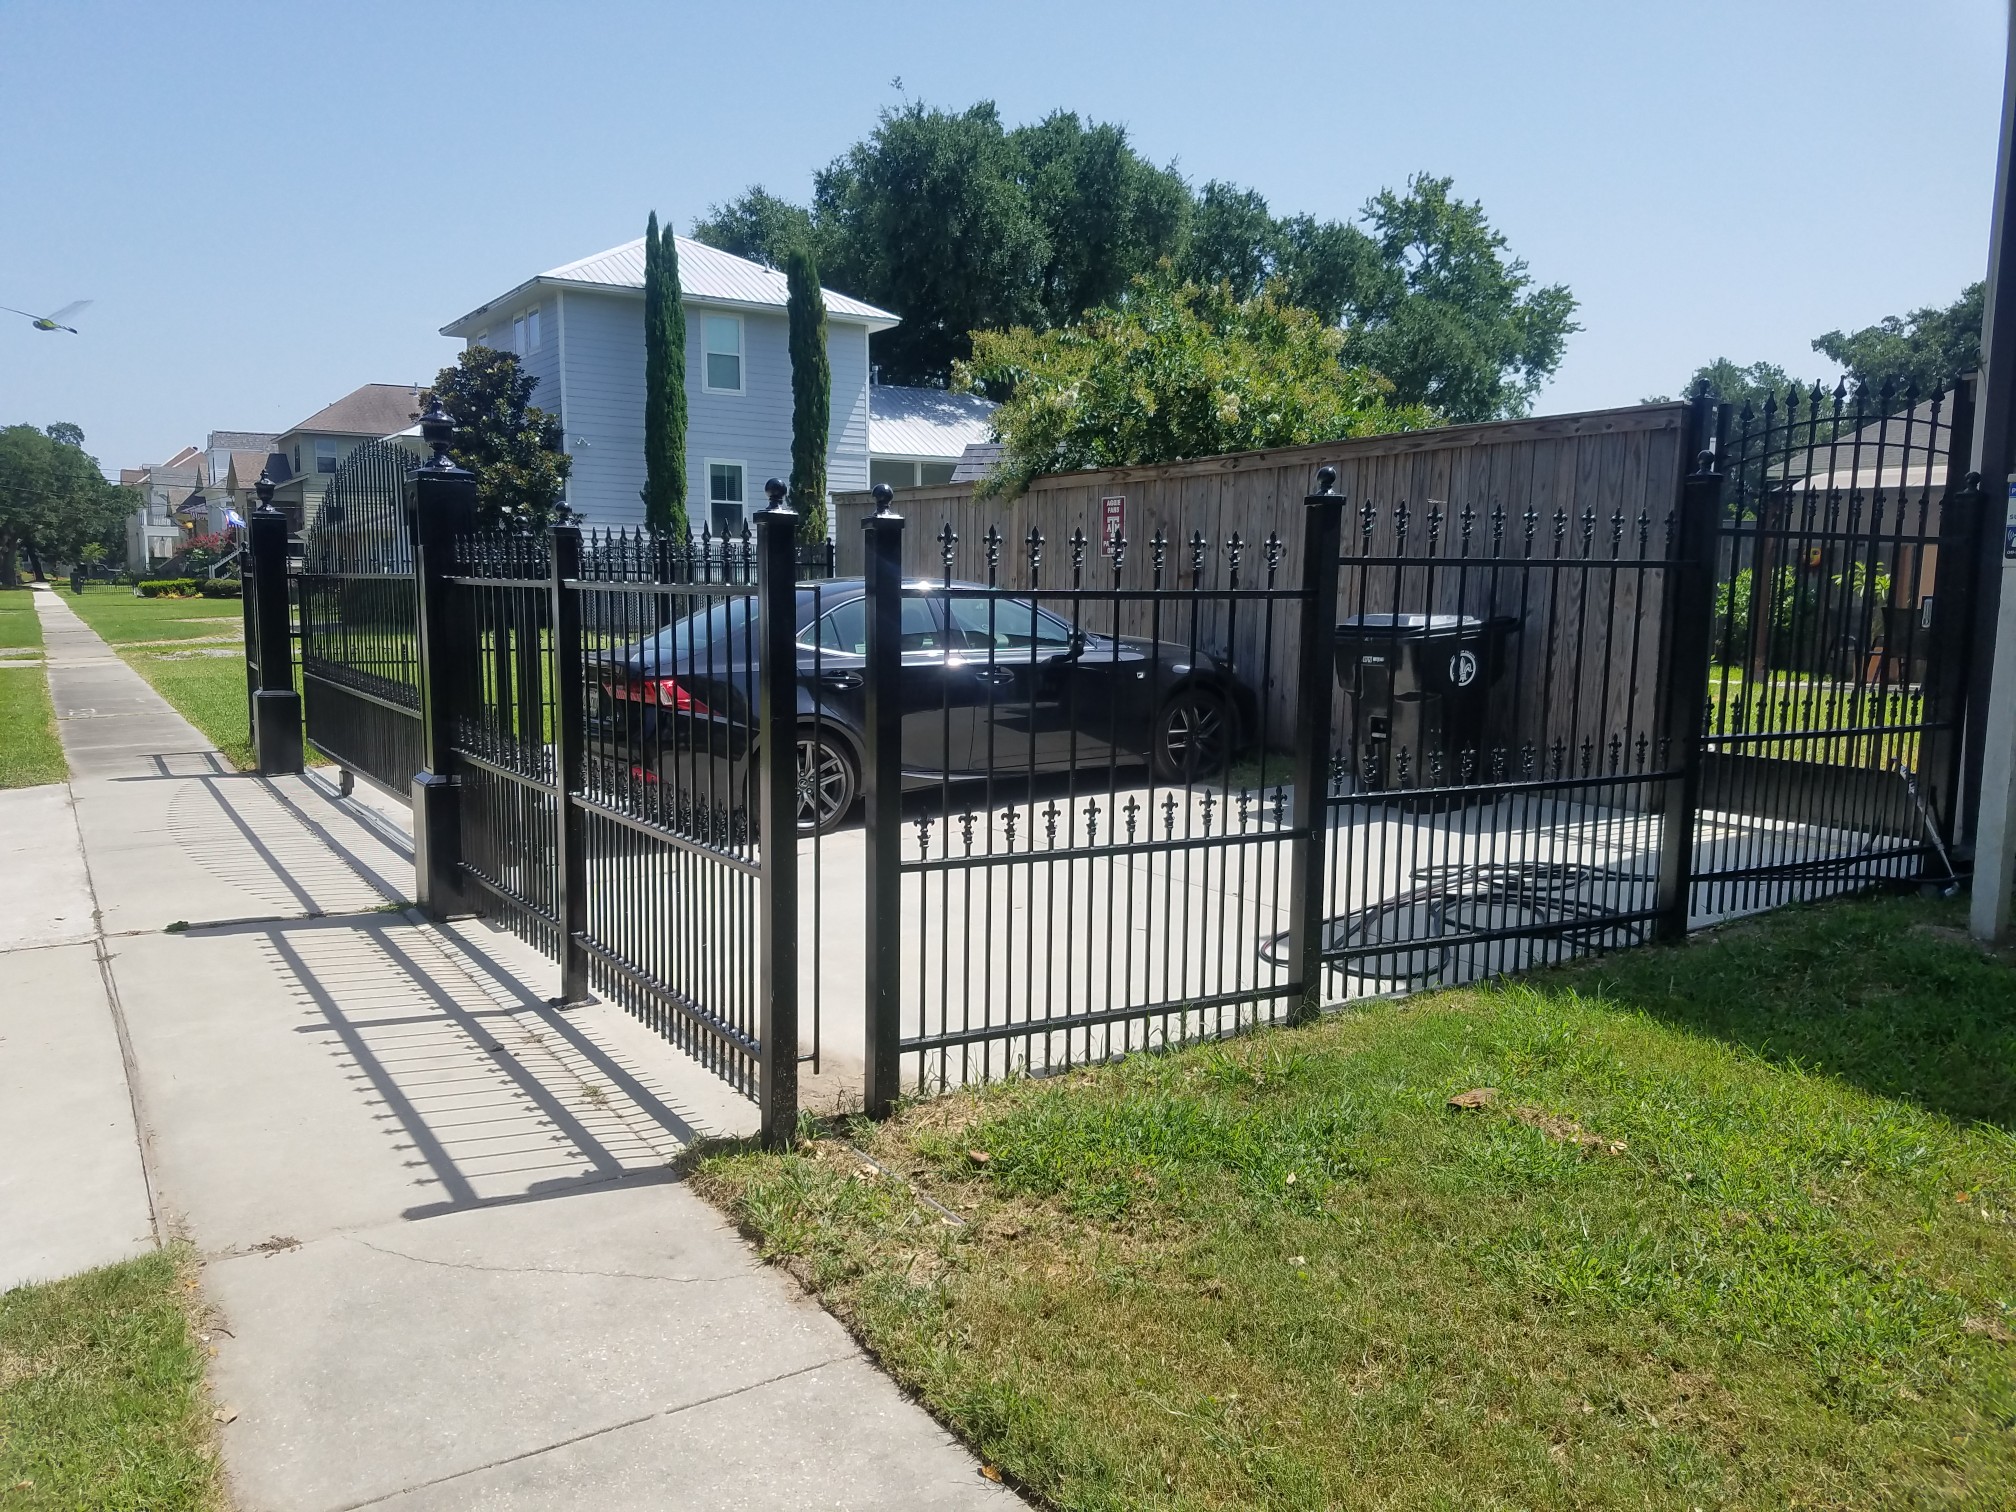 Black Aluminum Fences vs Wrought Iron - Learn More Here